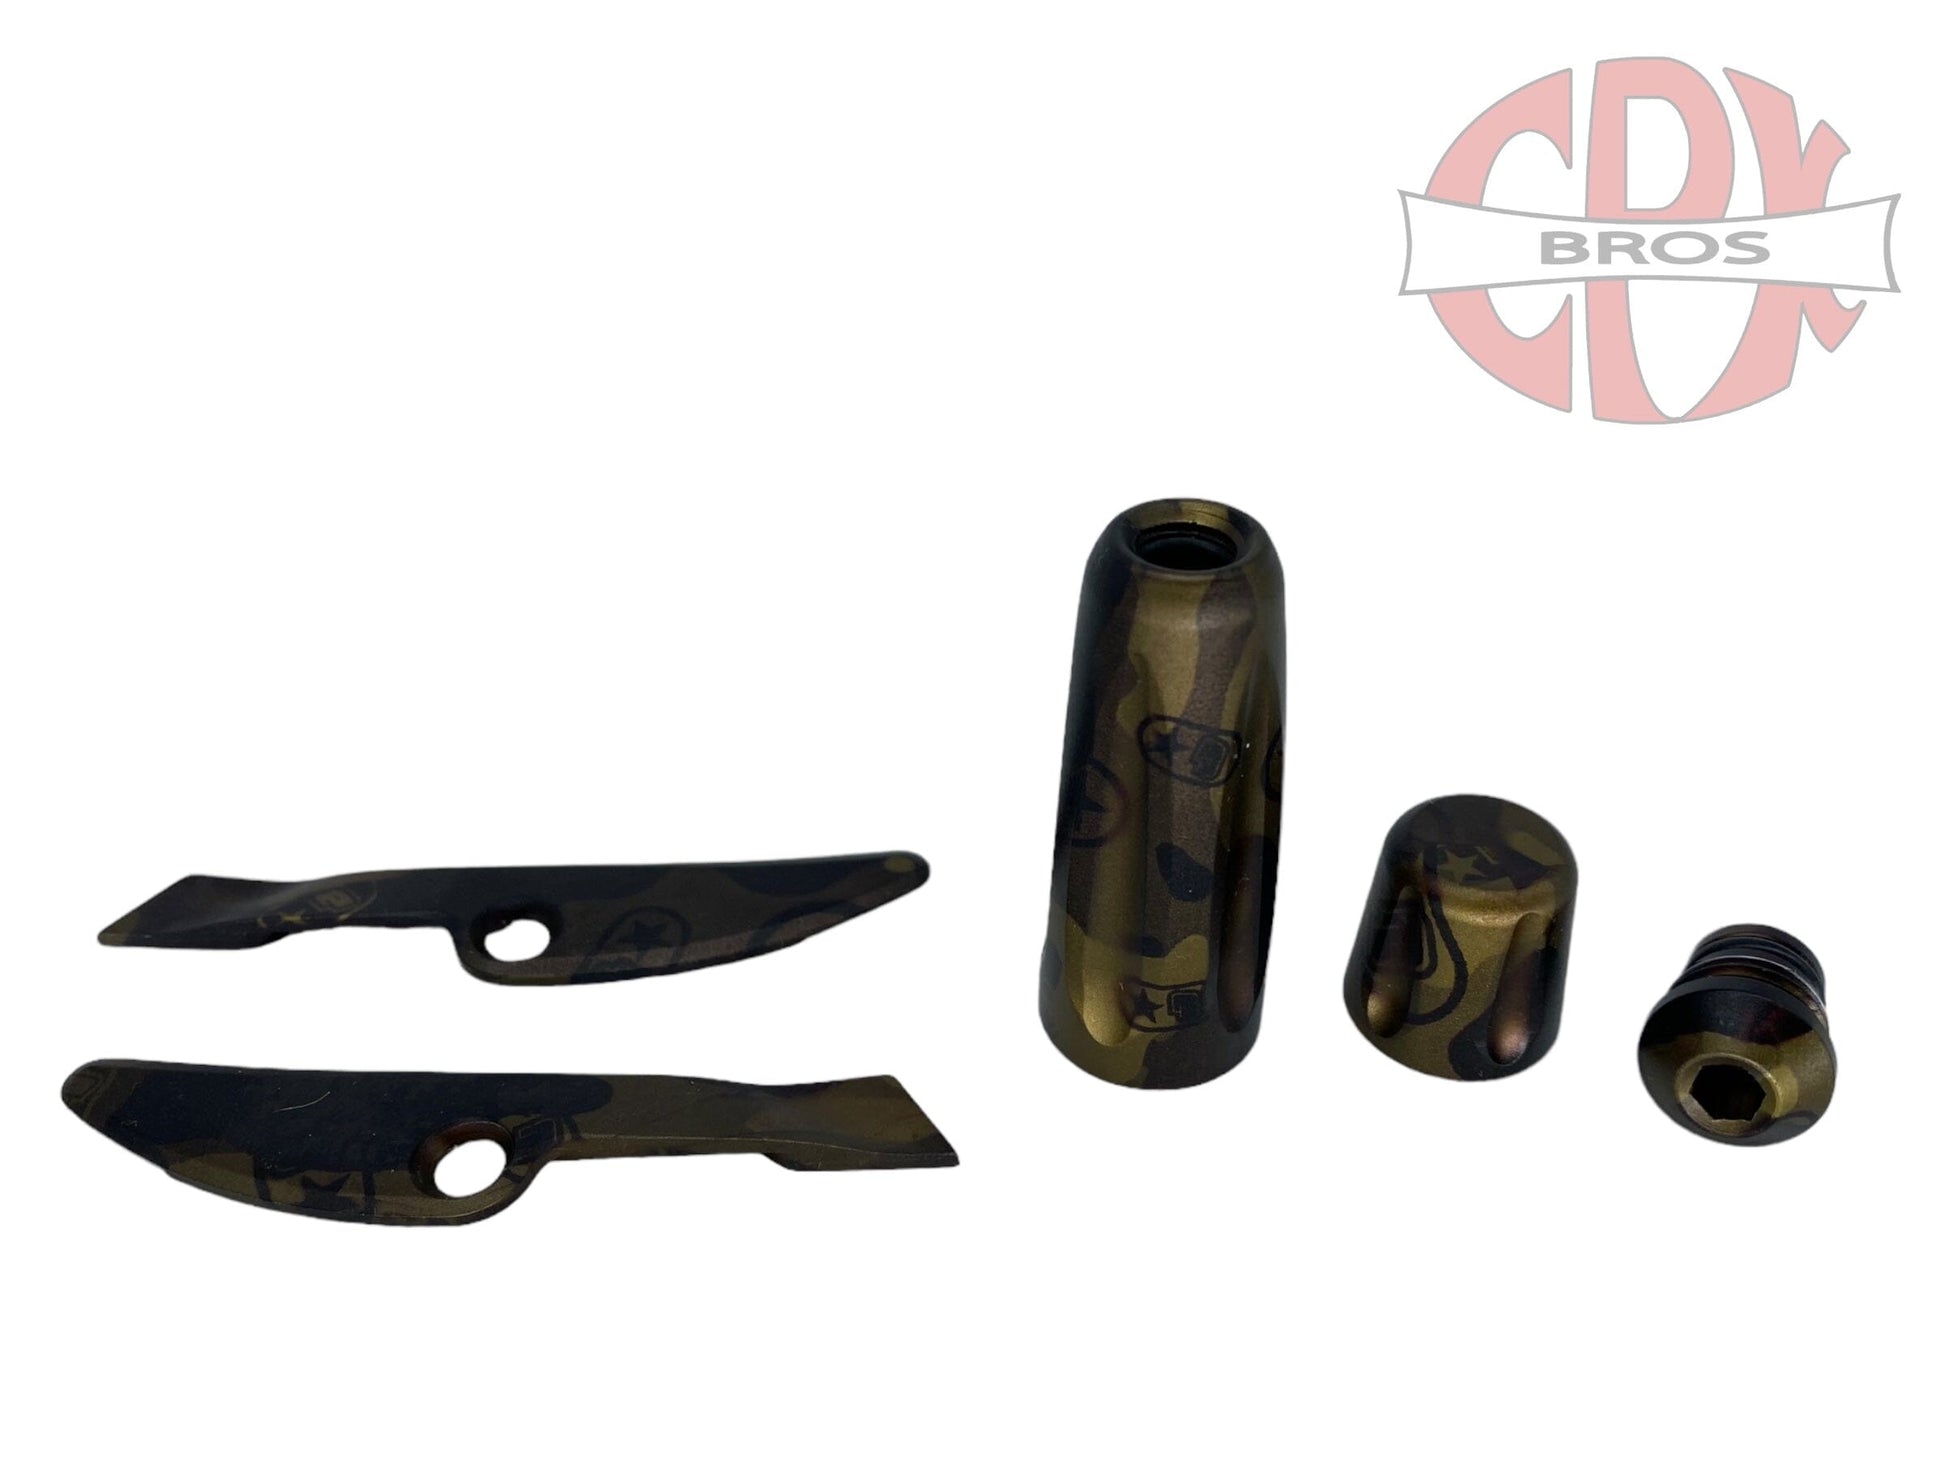 Used Planet Eclipse Ego 08 Paintball Gun Accent Kit-Camo Paintball Gun from CPXBrosPaintball Buy/Sell/Trade Paintball Markers, Paintball Hoppers, Paintball Masks, and Hormesis Headbands